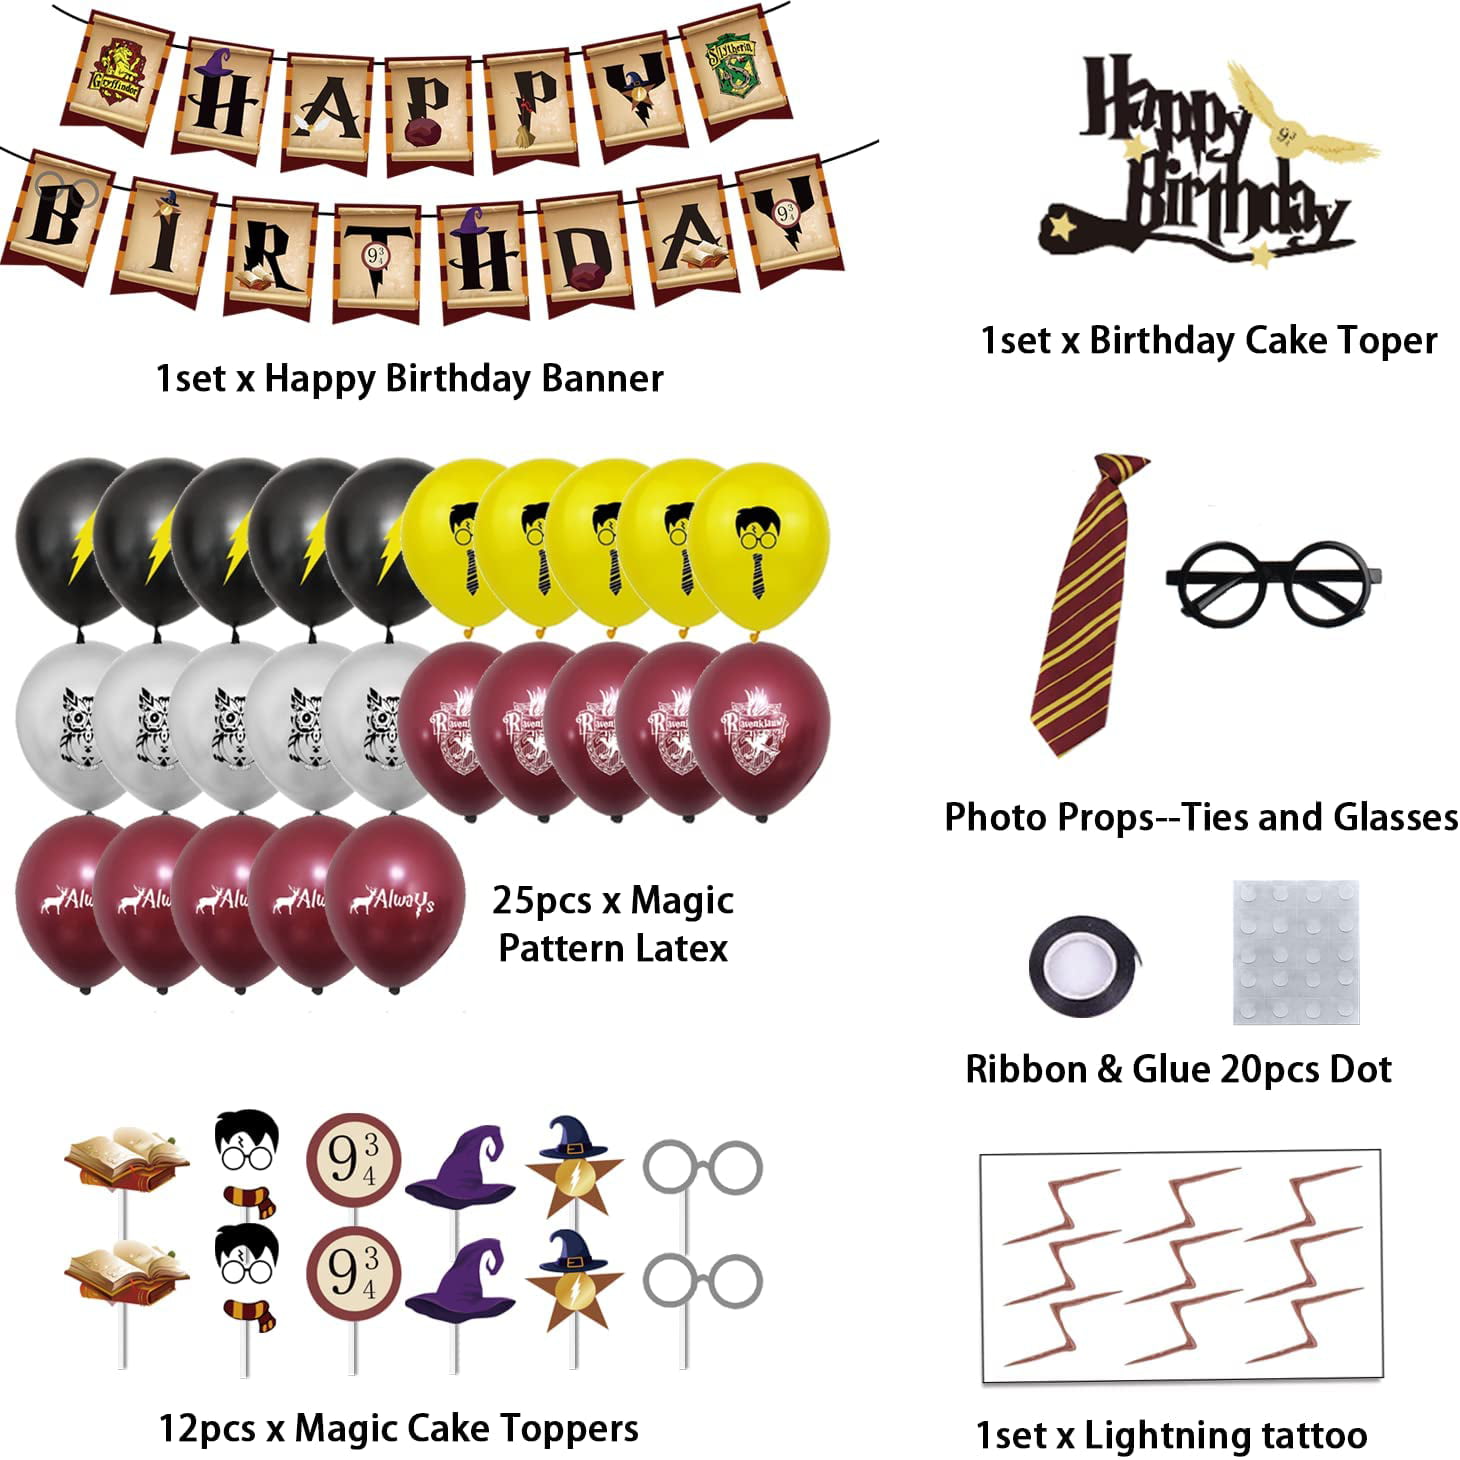 Harry Potter Themed Birthday Party Decorations Supplies HUGE RE-USEABLE  BANNER INCLUDED Balloons, Flag, Cake Cupcake Topper & Tattoos